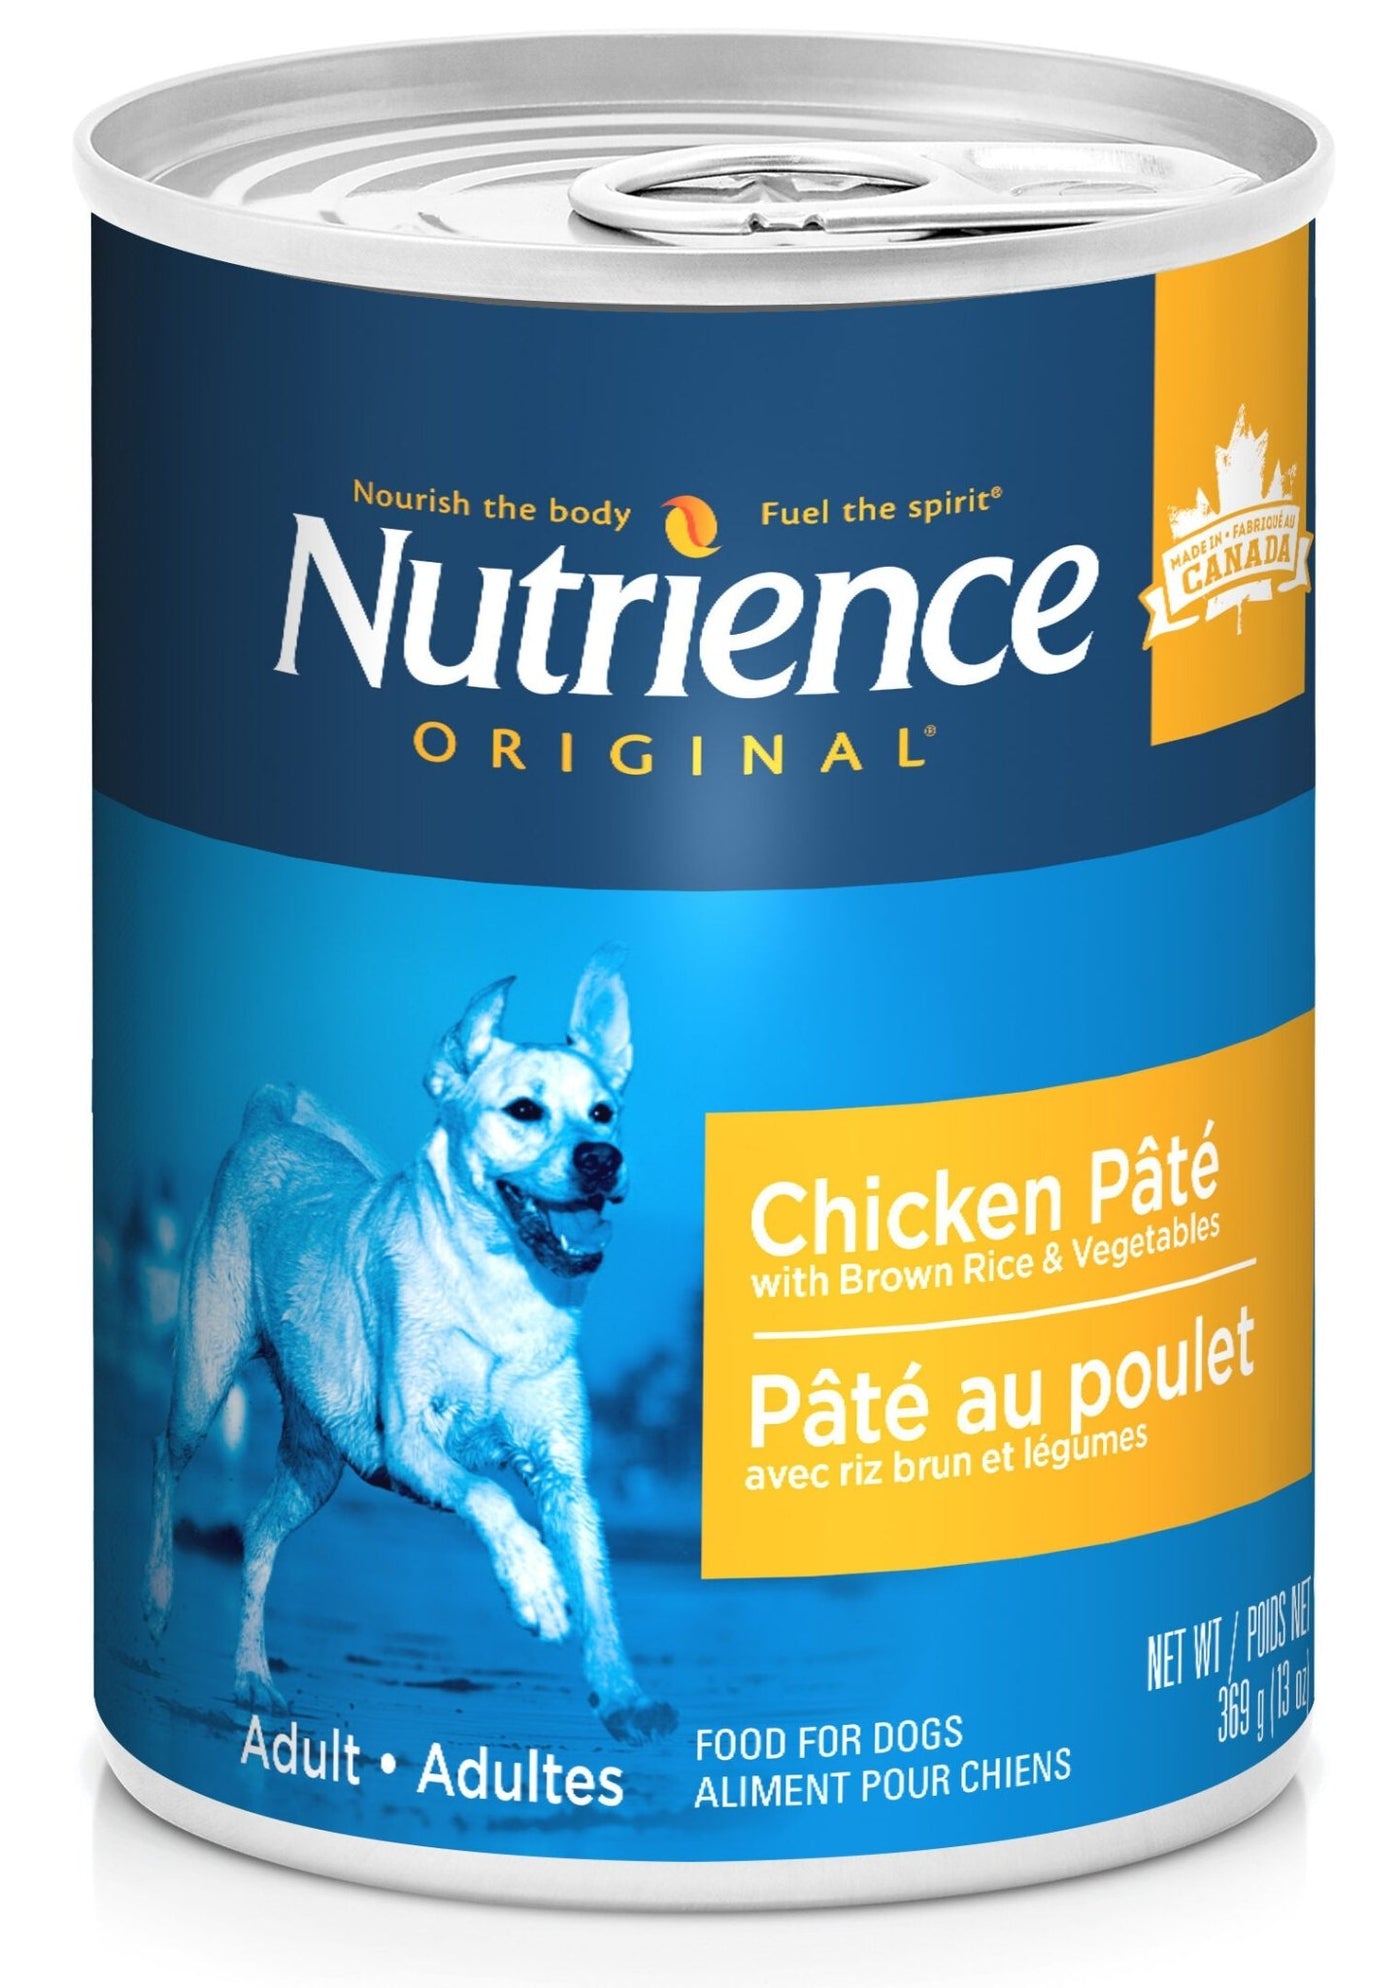 Original Chicken Pâté for Dogs with Brown Rice & Vegetables - Wet Dog Food - Nutrience - PetToba-Nutrience